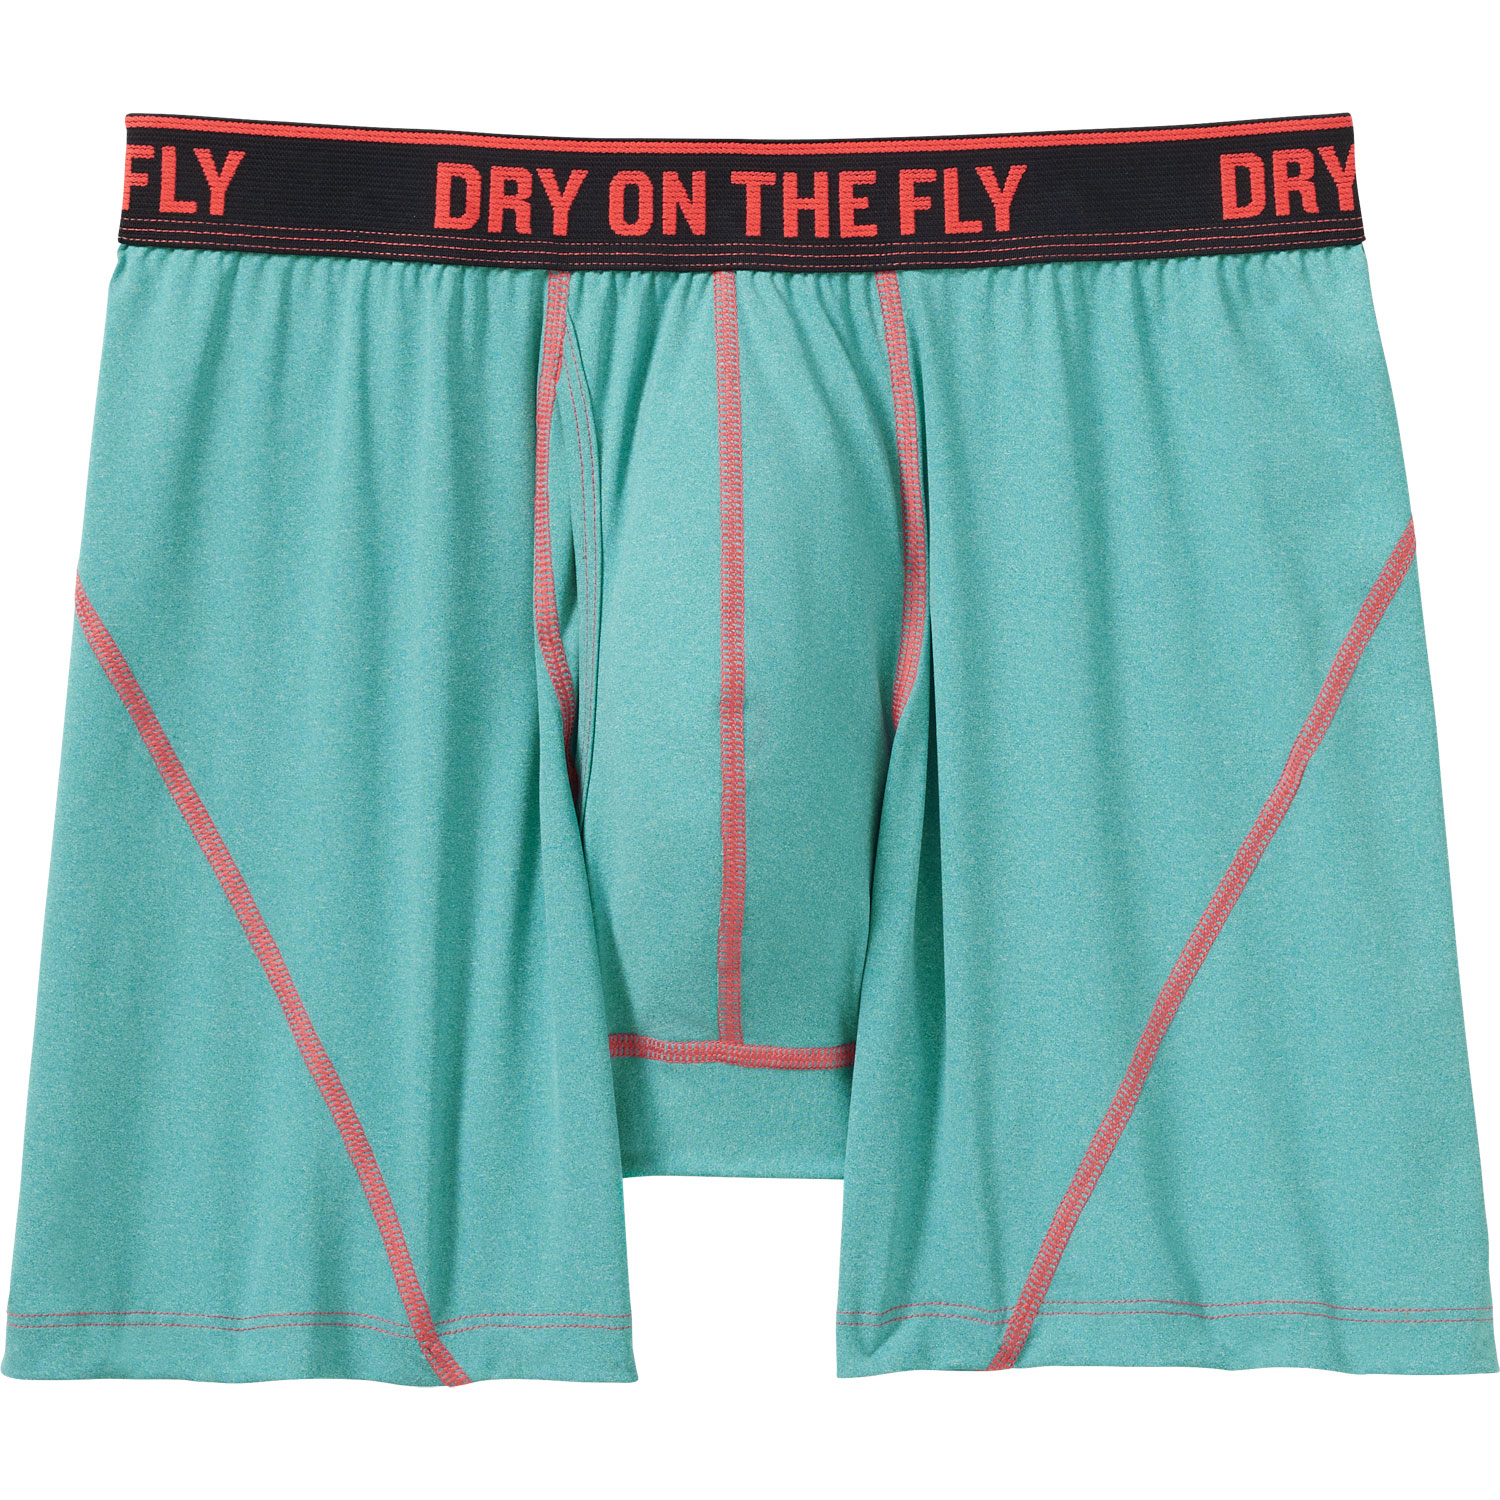 Men's Dry On The Fly Boxer Brief Underwear - Green SM Duluth Trading Company